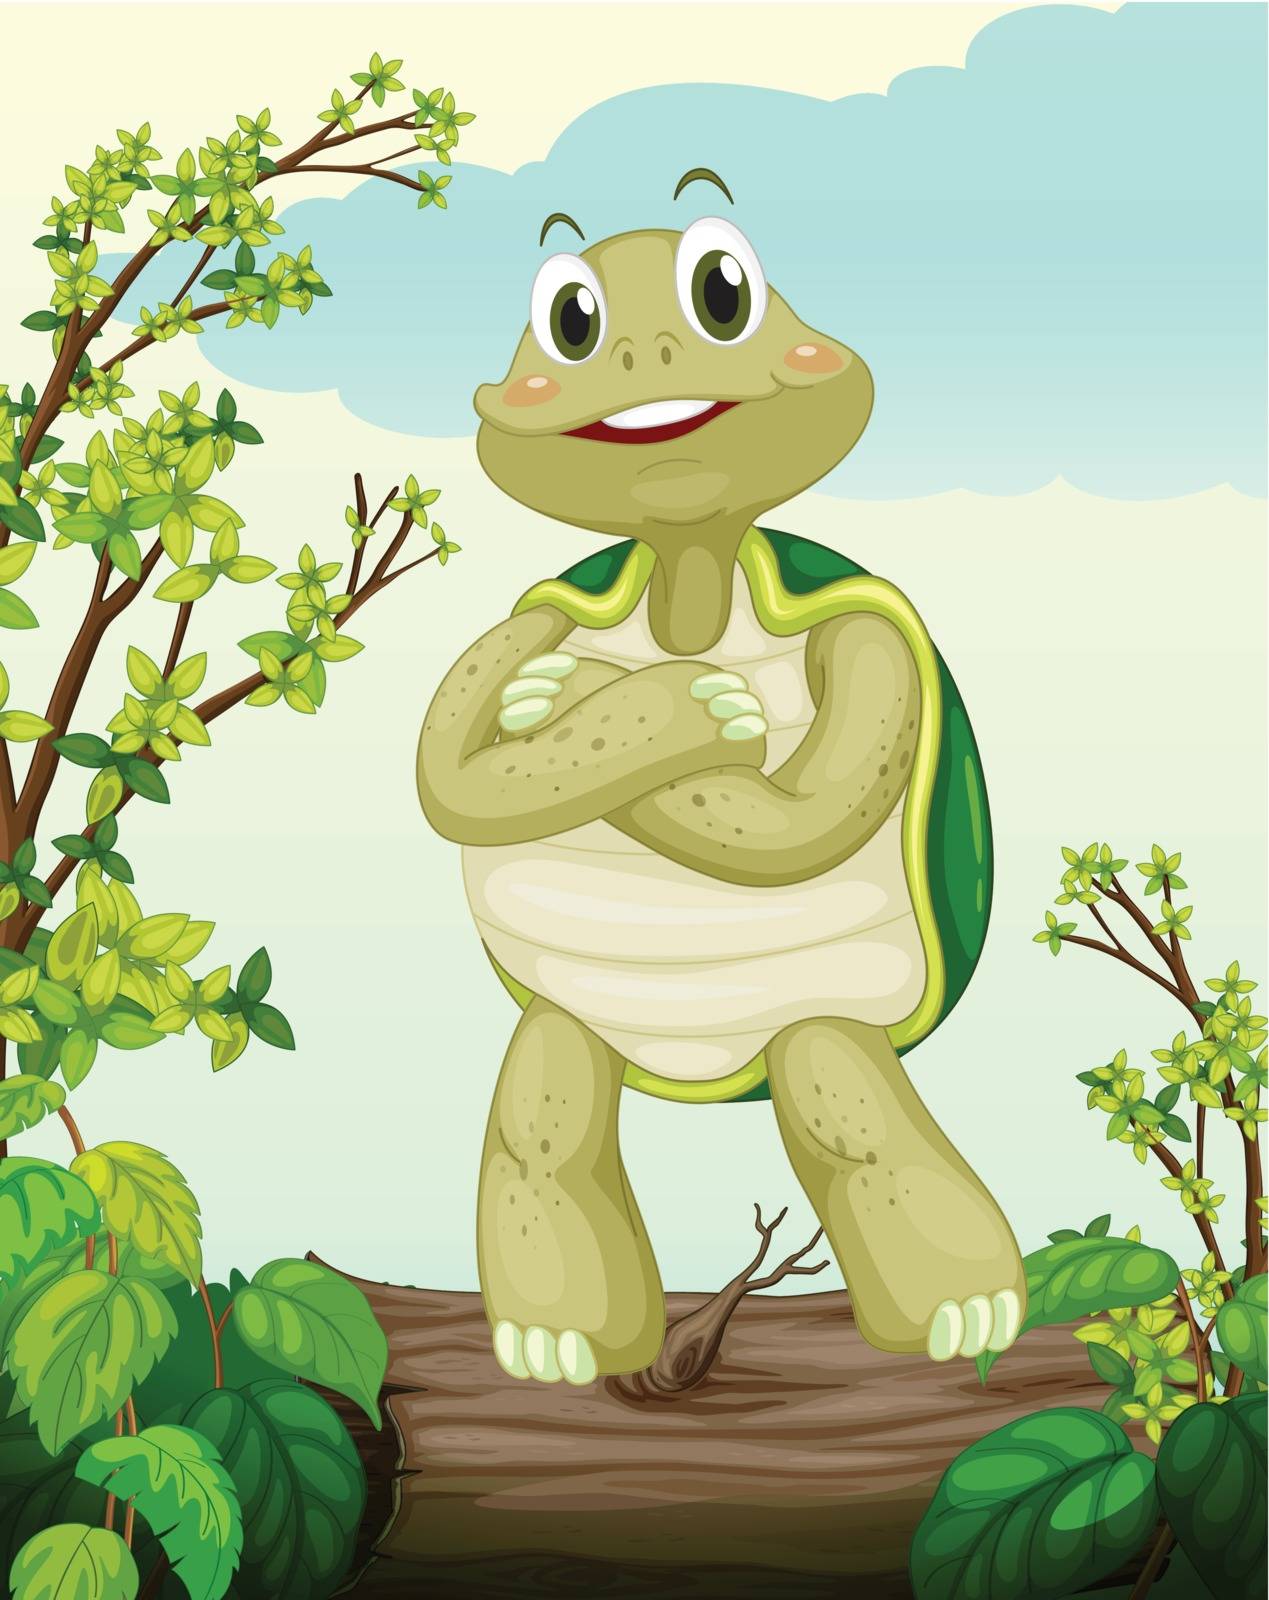 Illustration of a turtle standing on dry wood in a beautiful nature